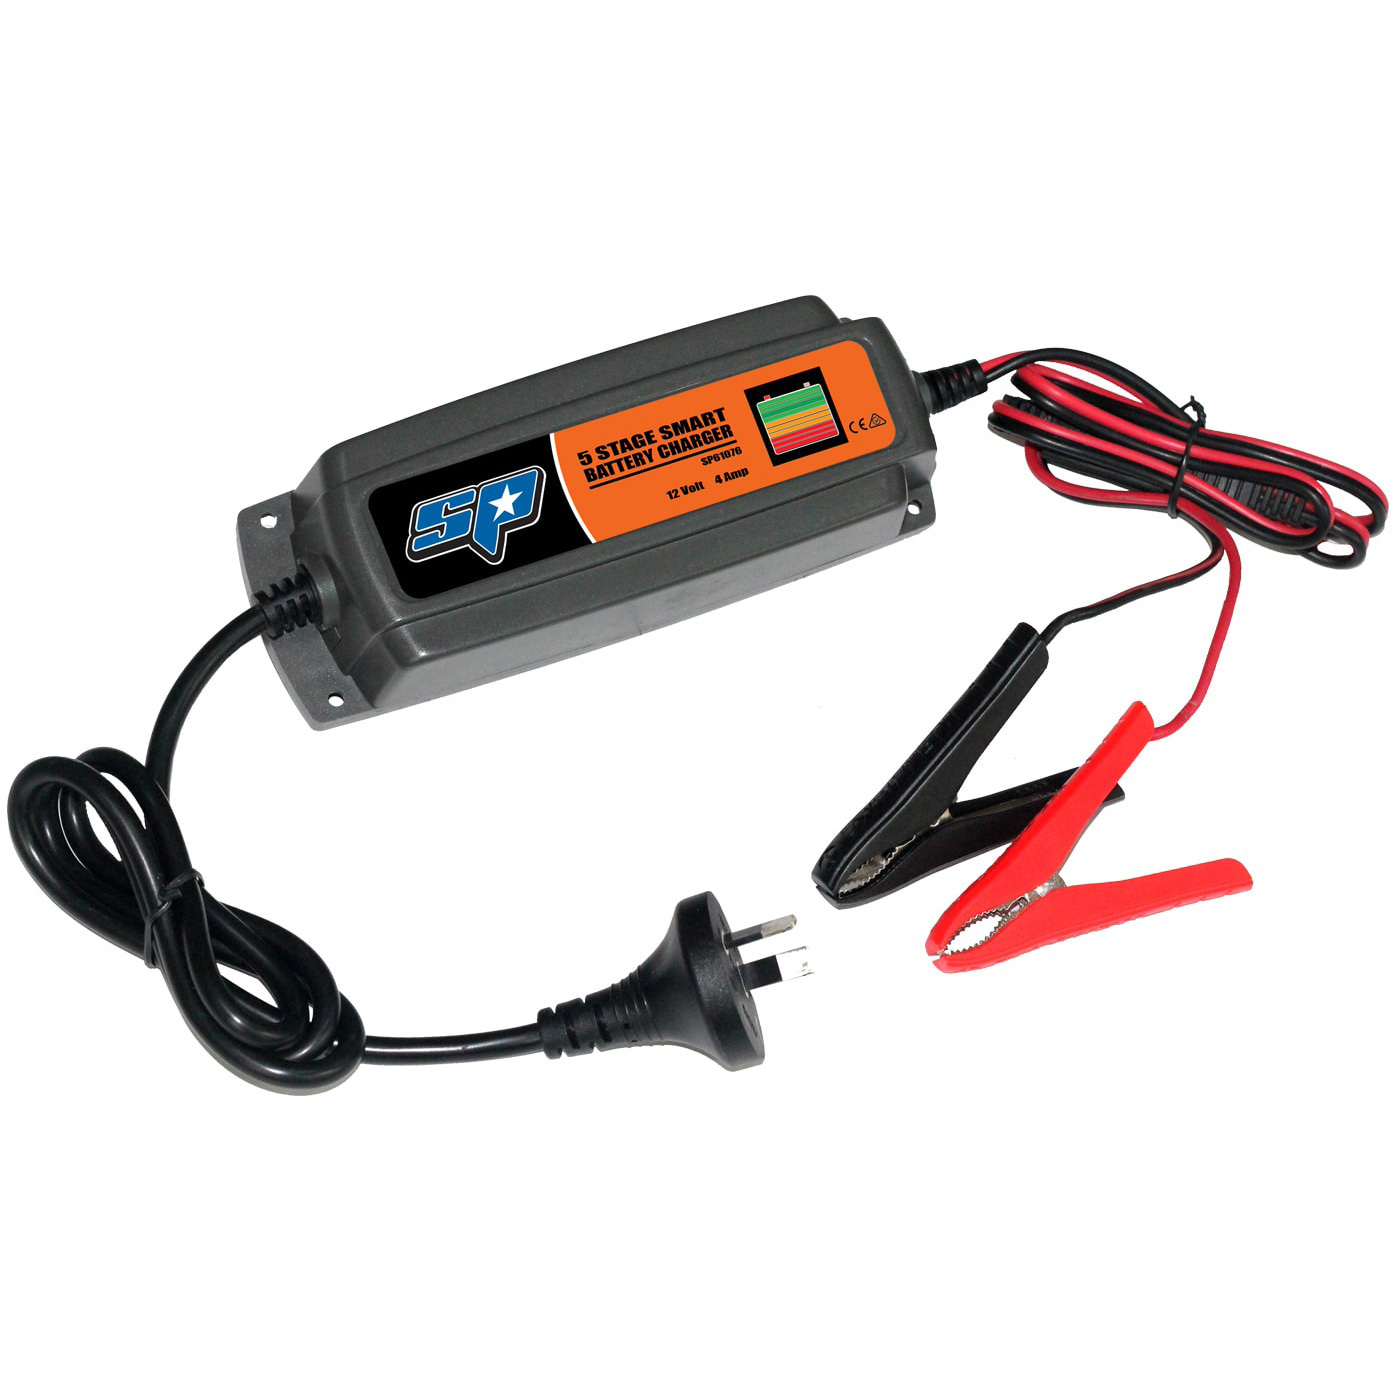 SP Tools 5 Stage 4 Amp Smart Battery Charger SP61076